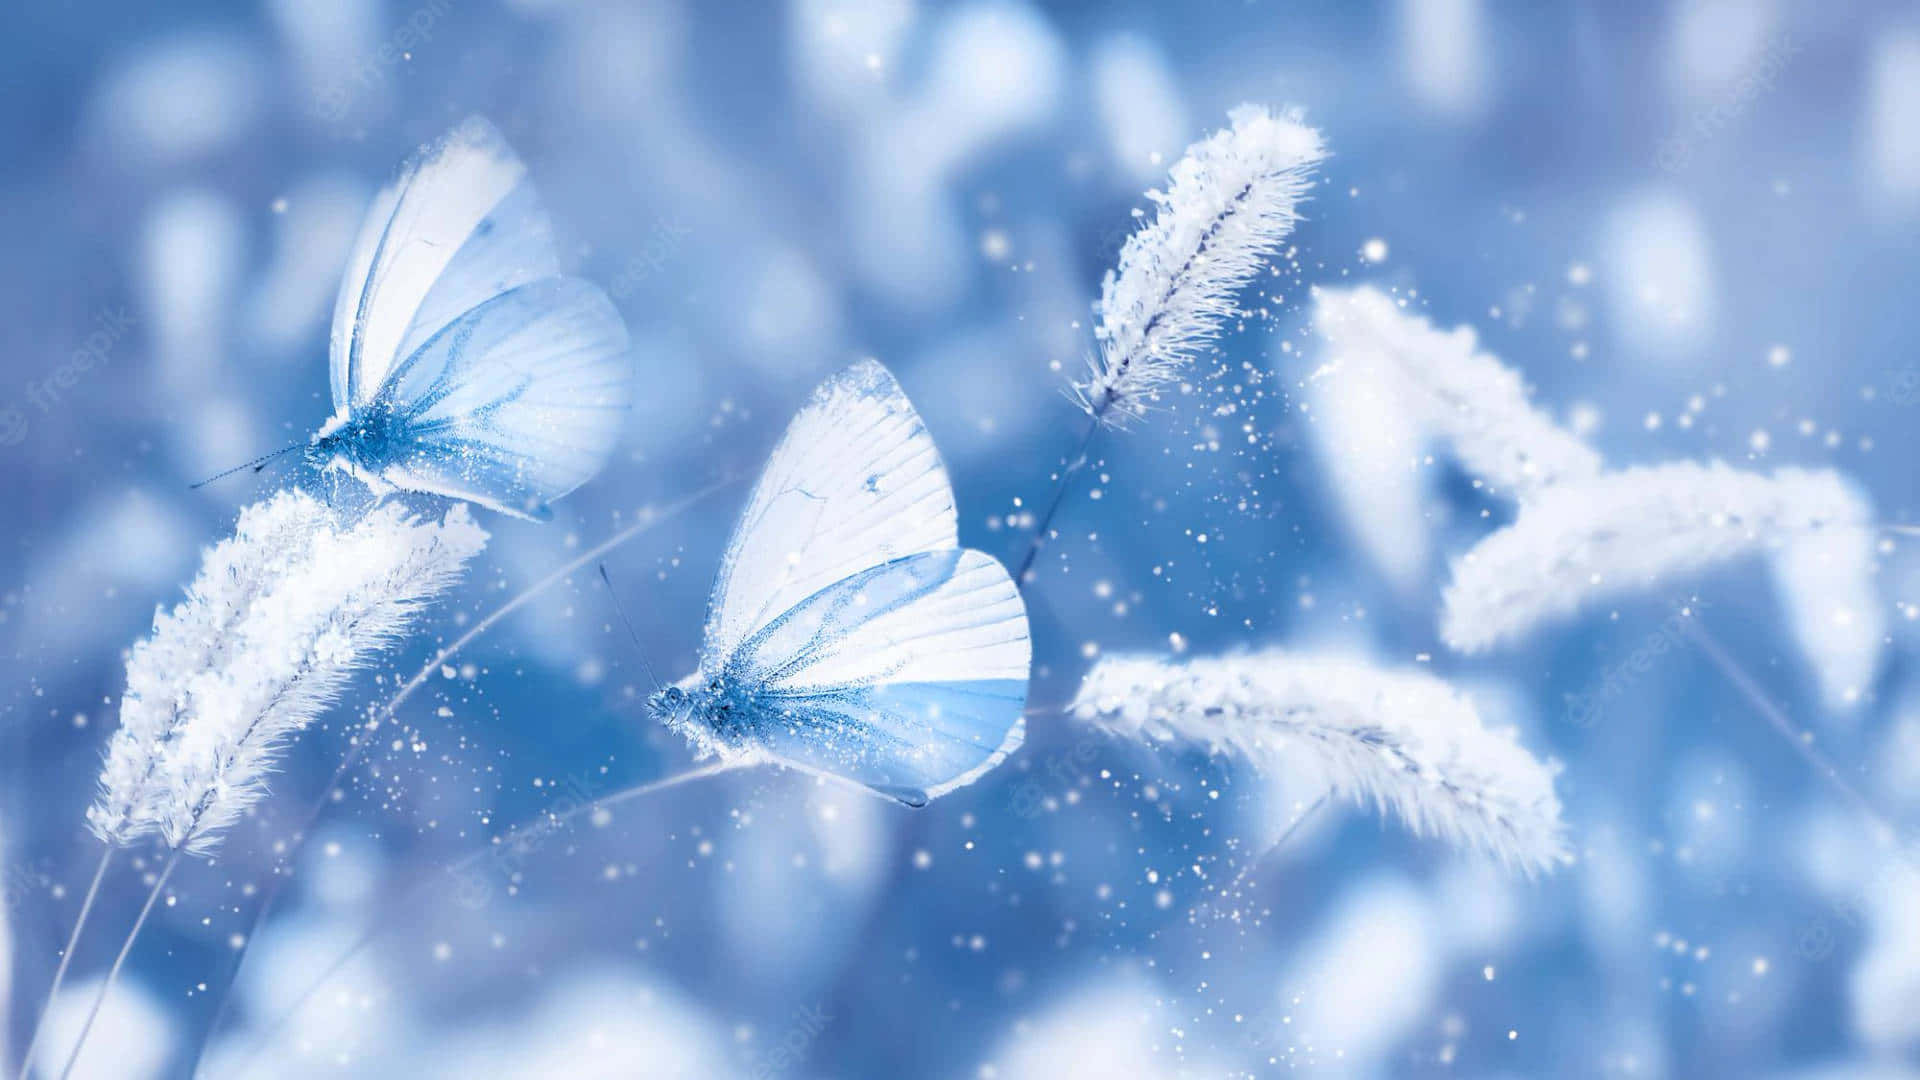 Two Blue Butterflies Flying In The Snow